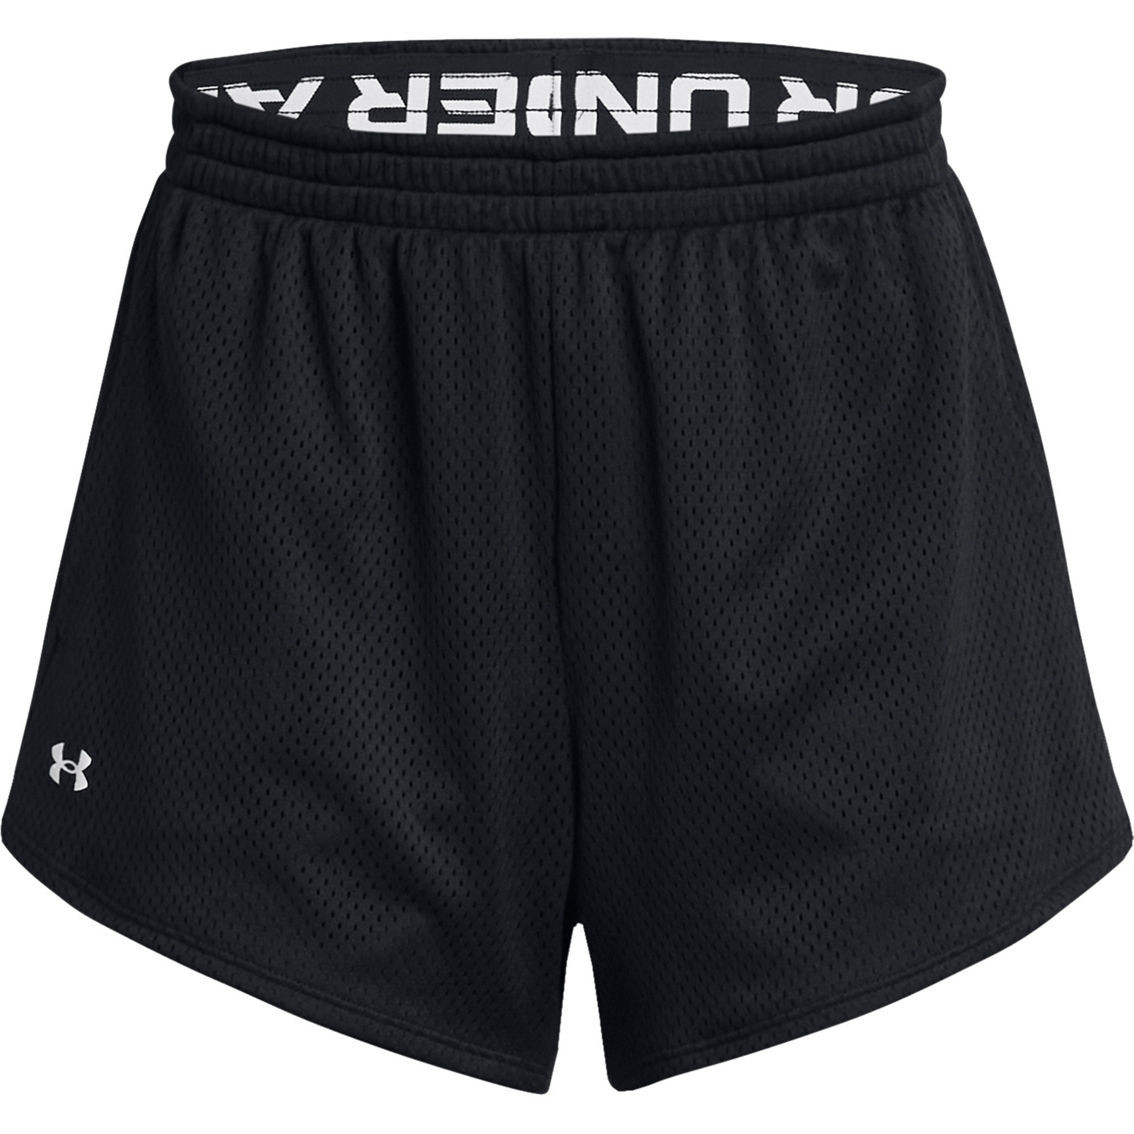 Under Armour Play Up Mesh Shorts - Image 5 of 6